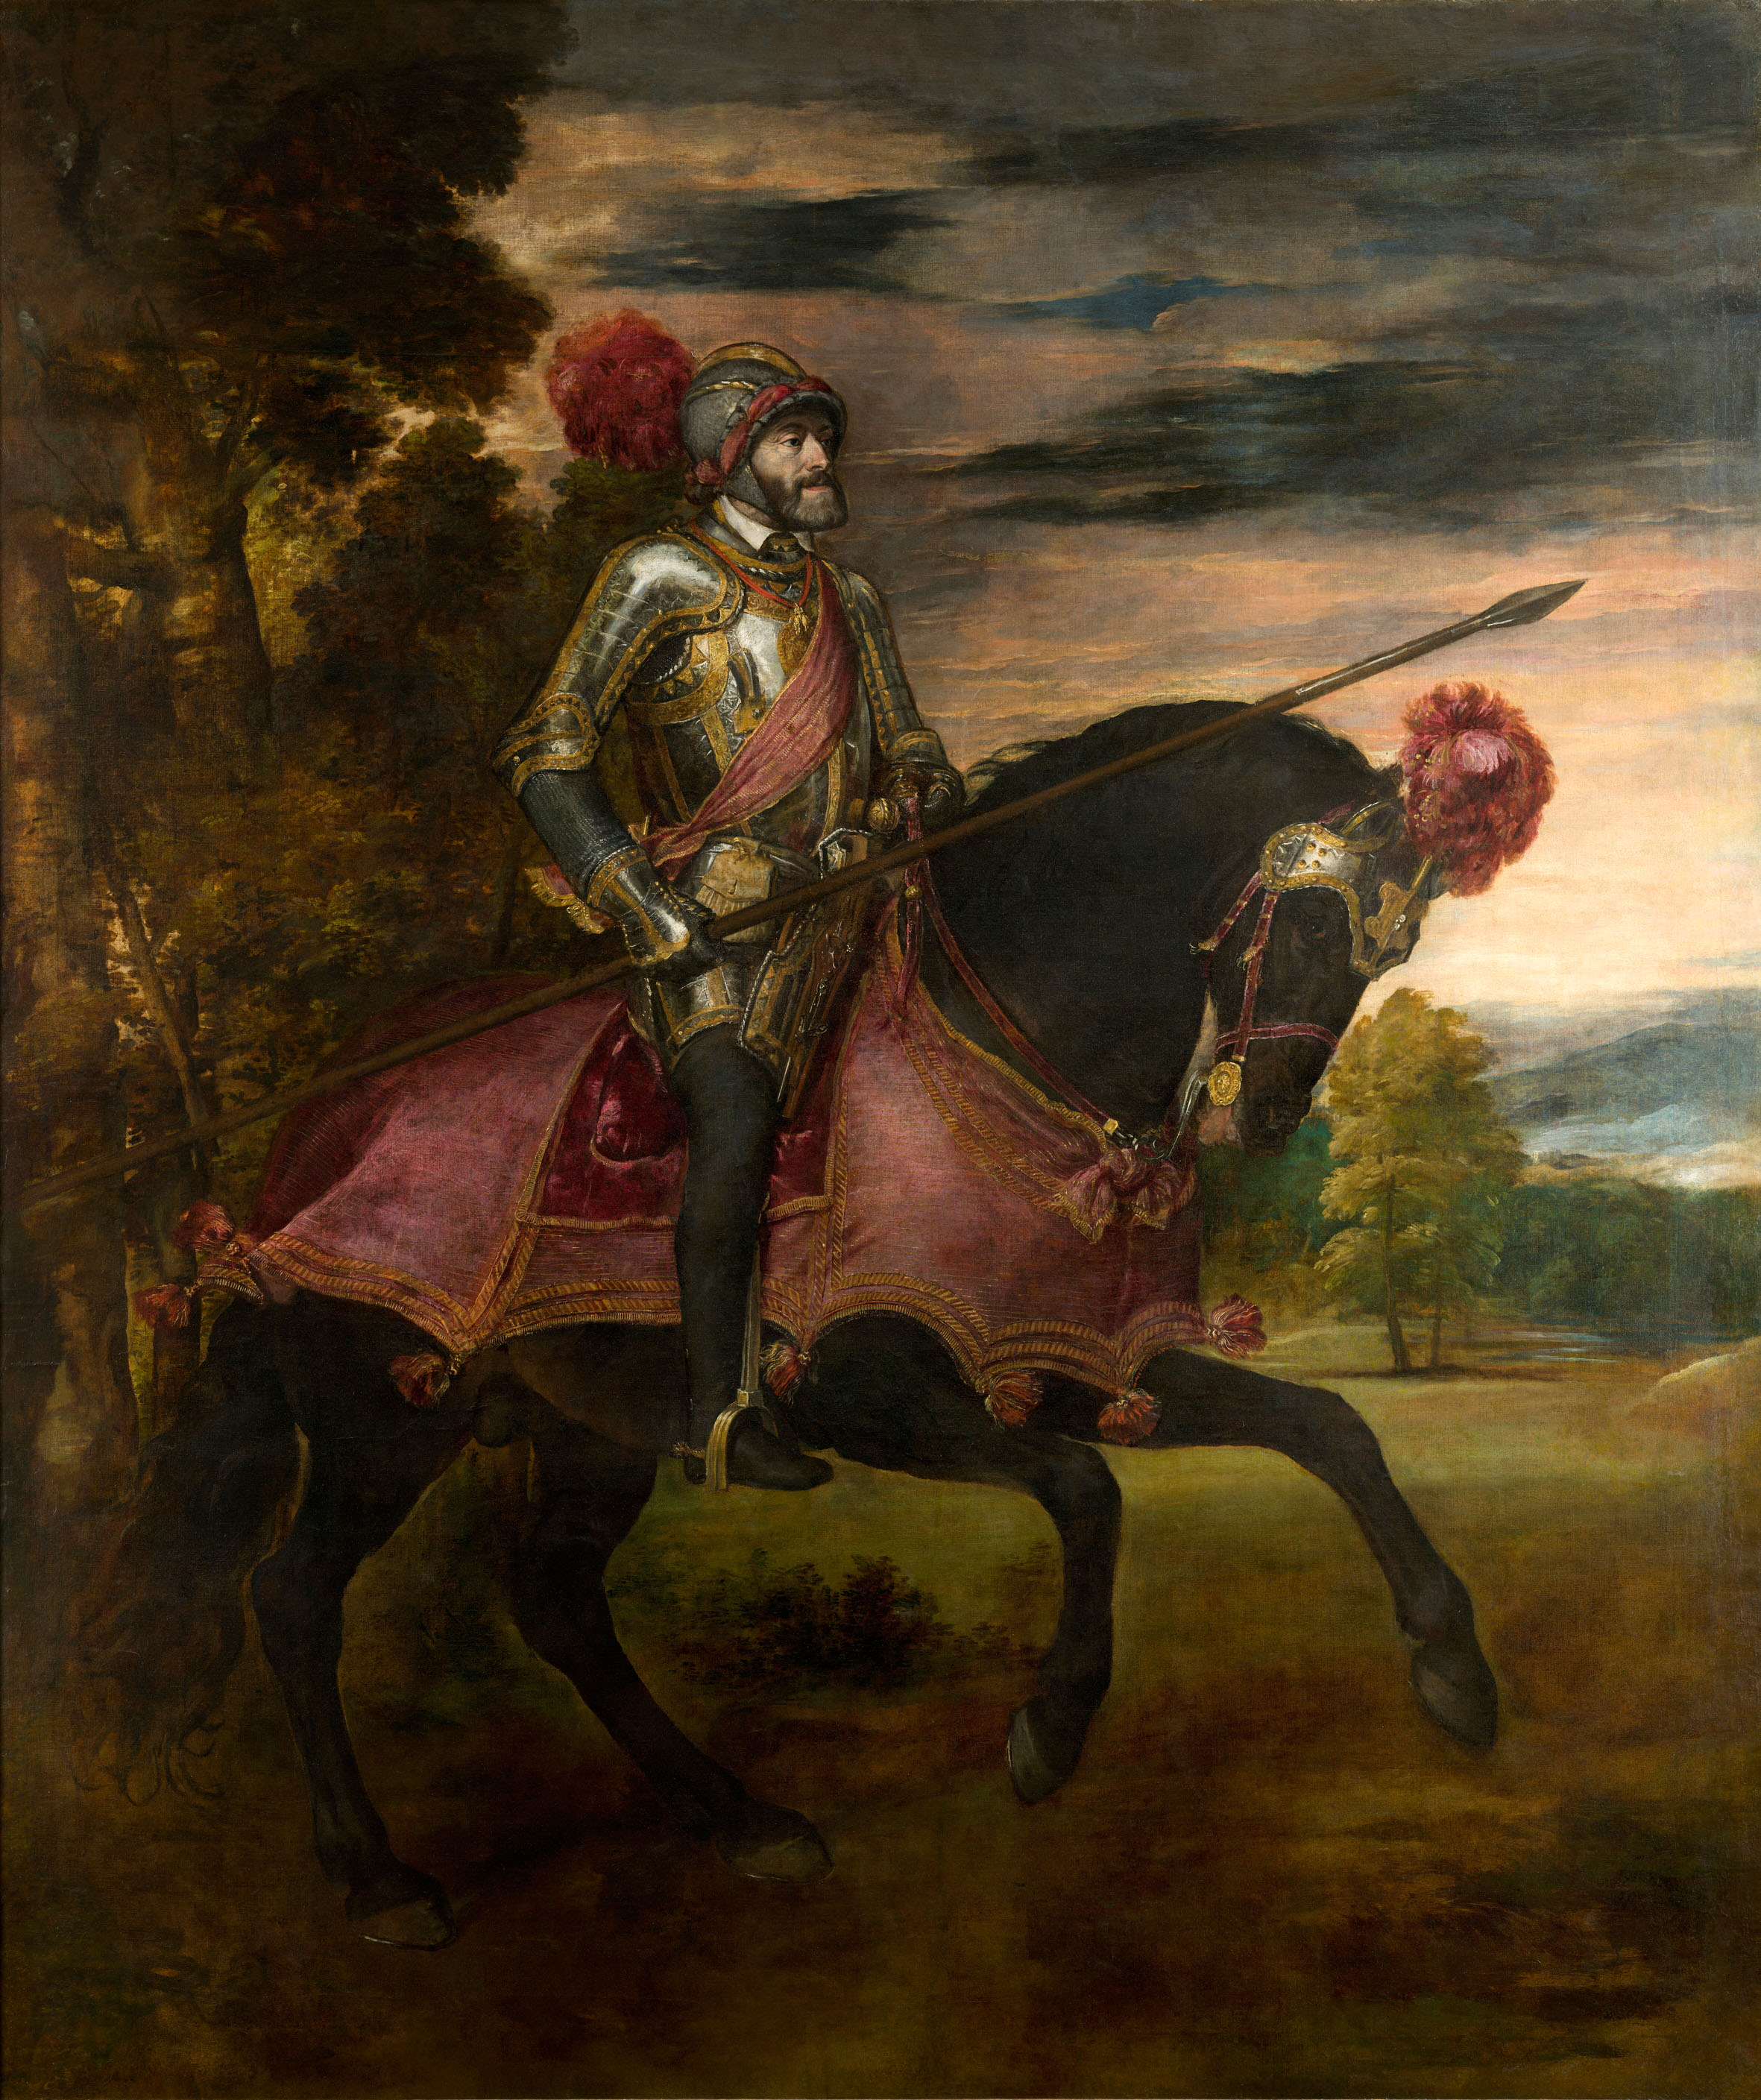 Carlos V at the Battle of Mühlburg, Titian